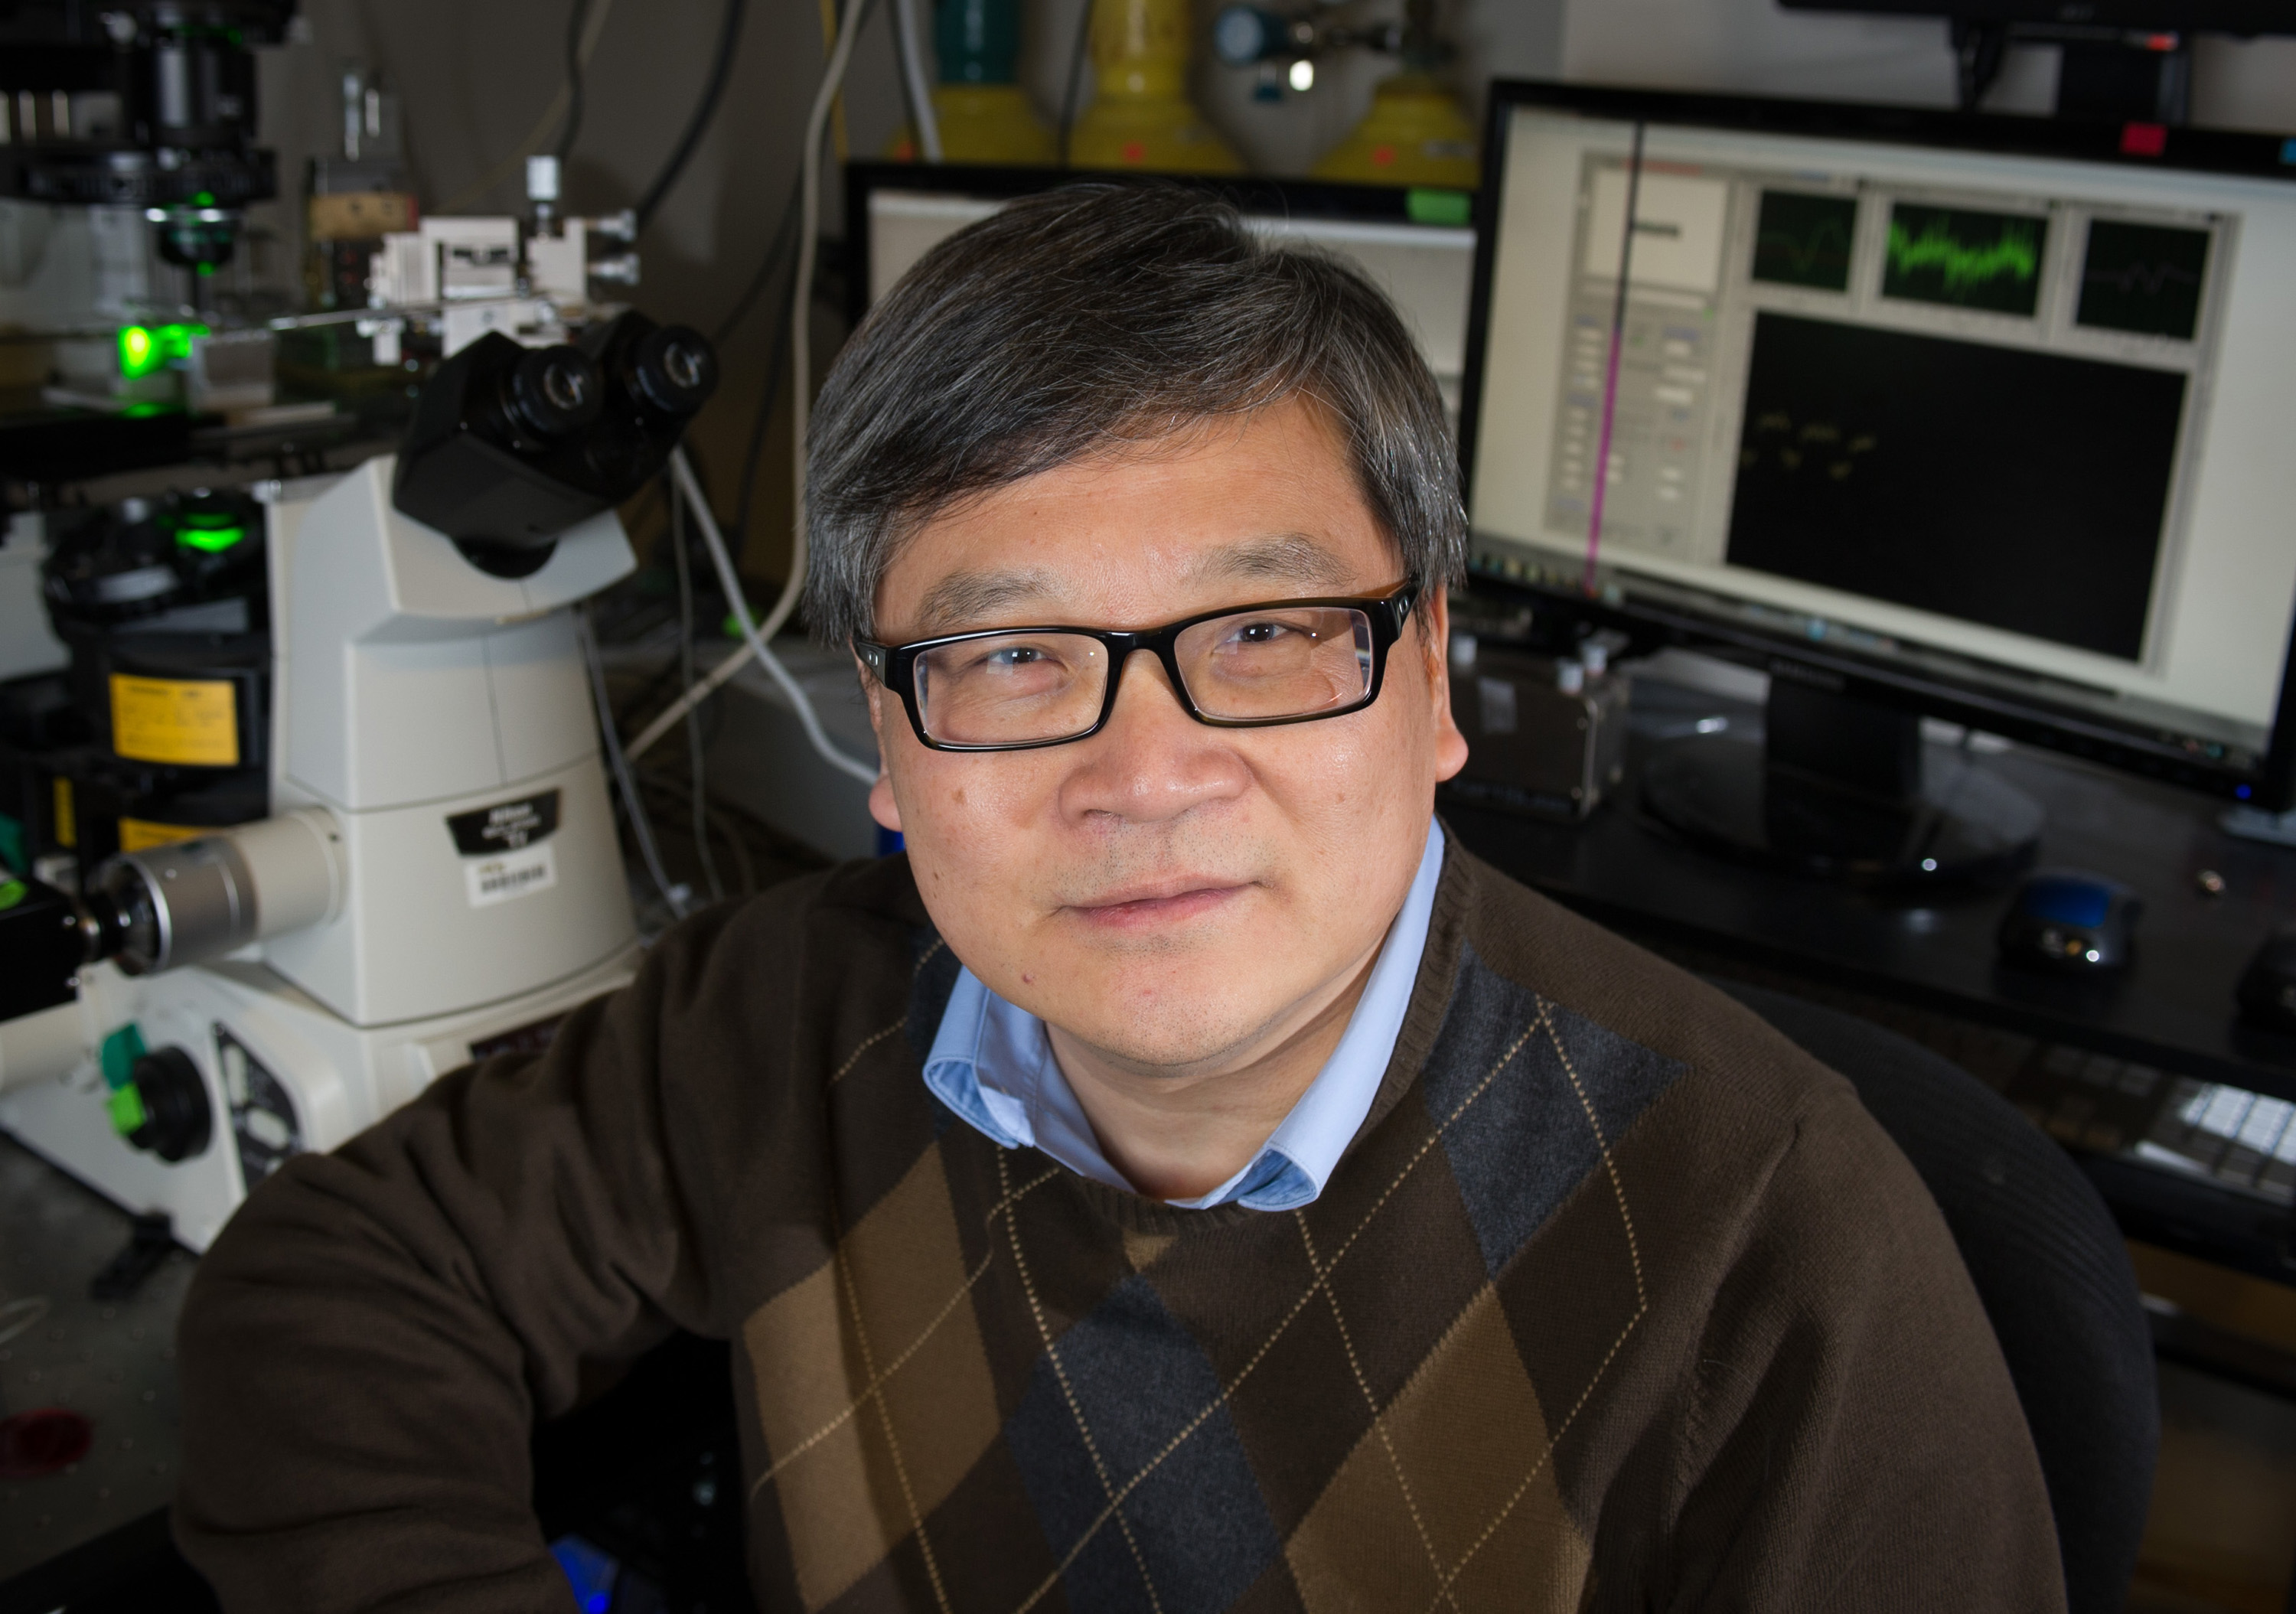 Cheng Zhu, a Regents’ professor in the Wallace H. Coulter Department of Biomedical Engineering at Georgia Tech and Emory University, is shown with biomembrane force probe equipment. (Georgia Tech Photo: Rob Felt)